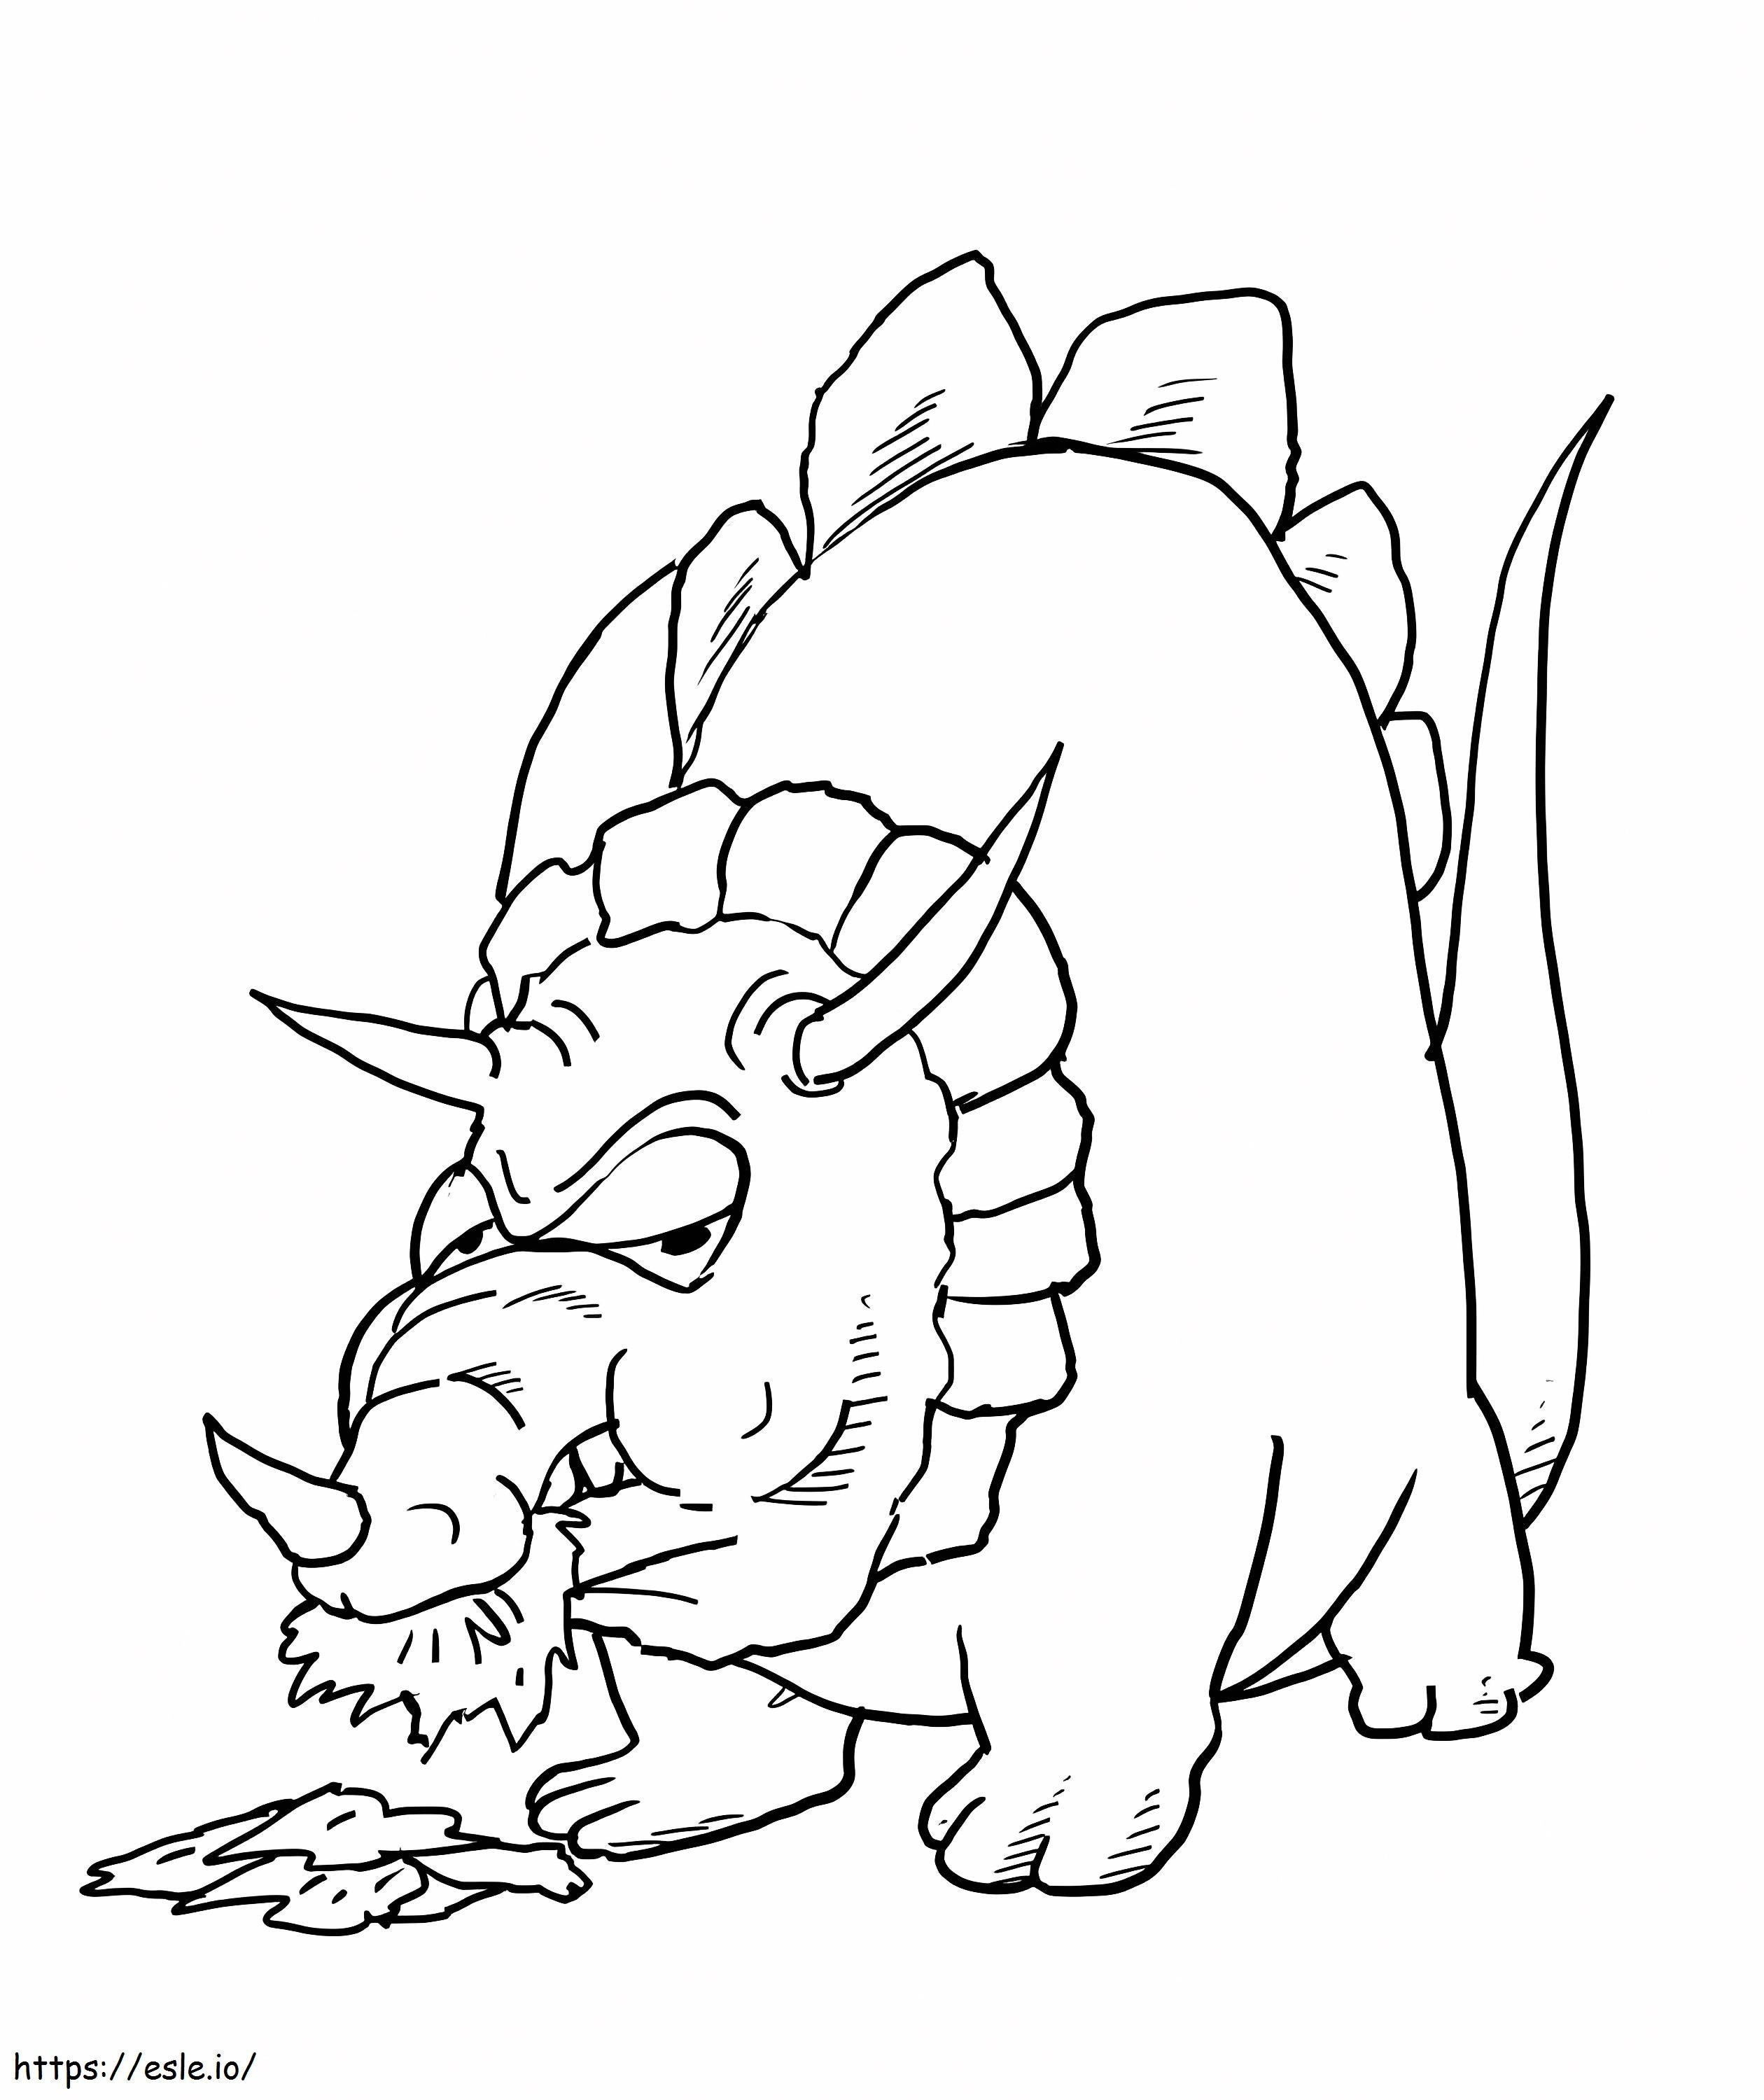 Funny Triceratops Coloring Page coloring page